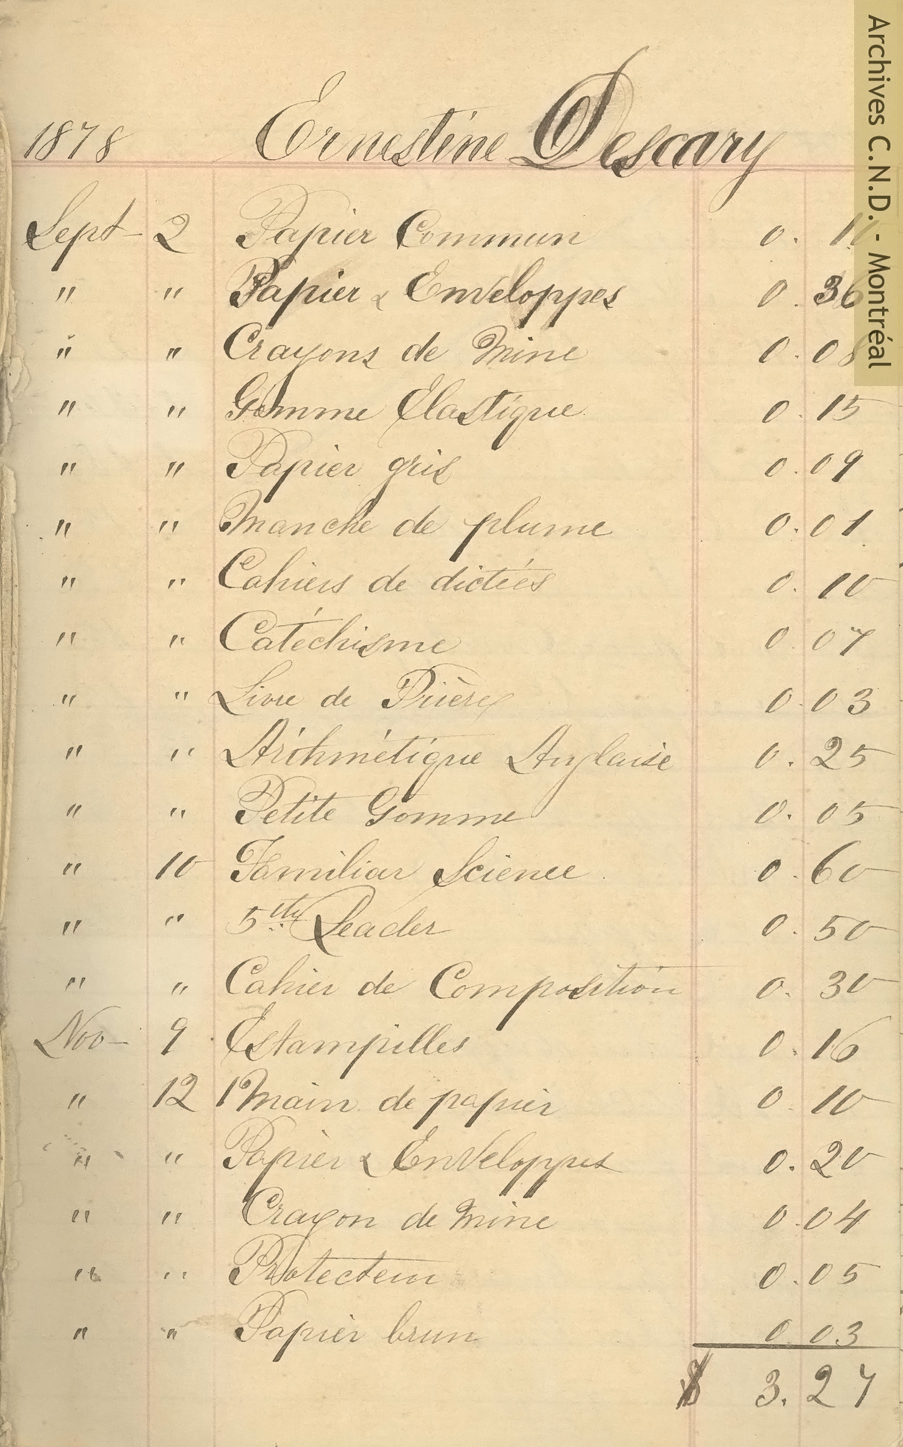 Page taken from an account book of a student at Mont Sainte-Marie for the purchase of school supplies